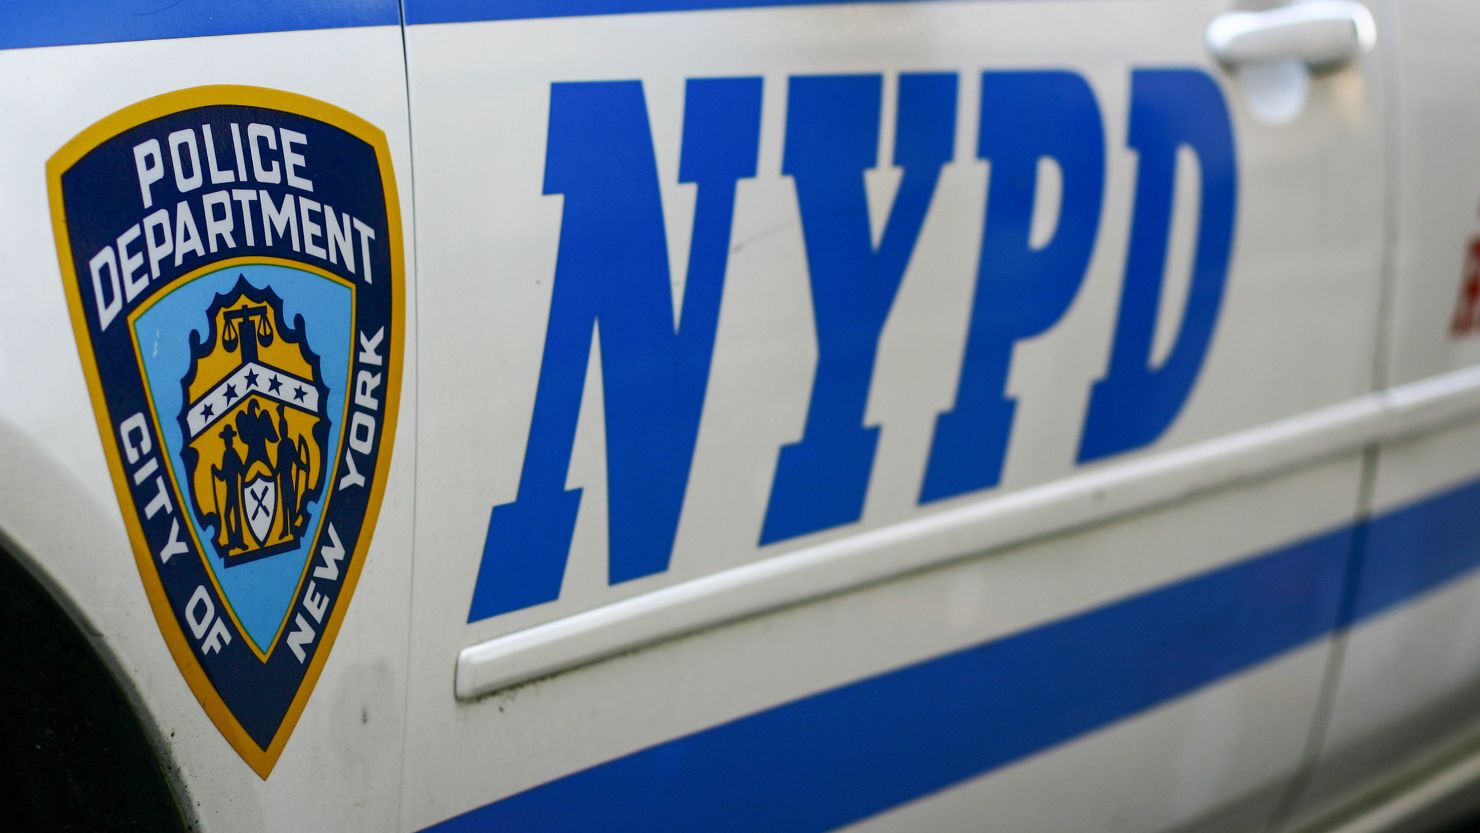 The NYPD said the officer involved has been suspended without pay.